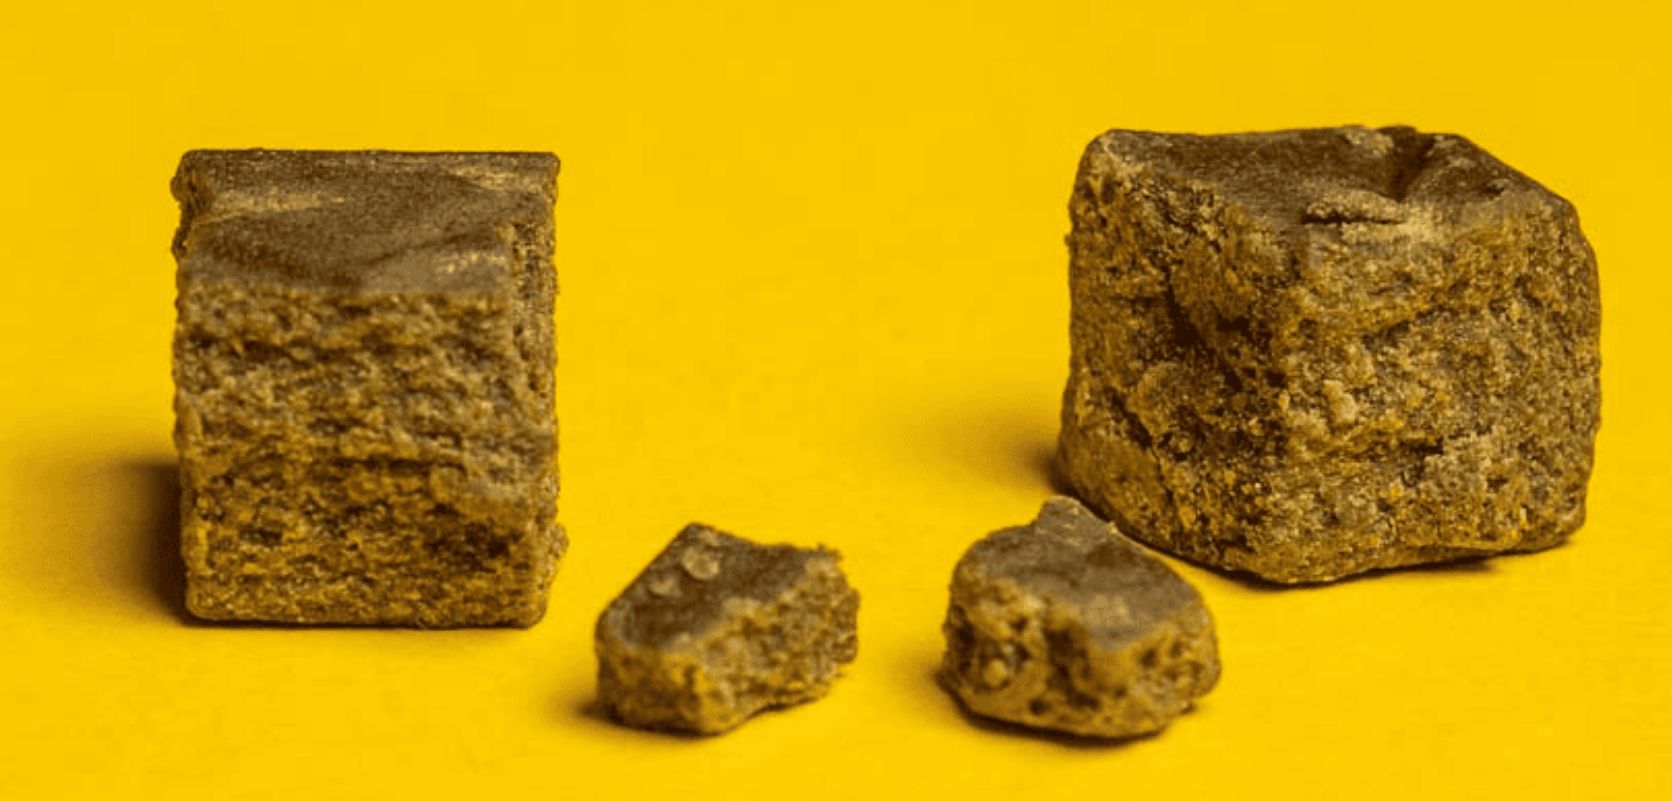 In the best case, quality, fresh hash will provide you with around 60 percent of THC, possibly more! To get even higher THC levels, order weed online from a legitimate cannabis shop.